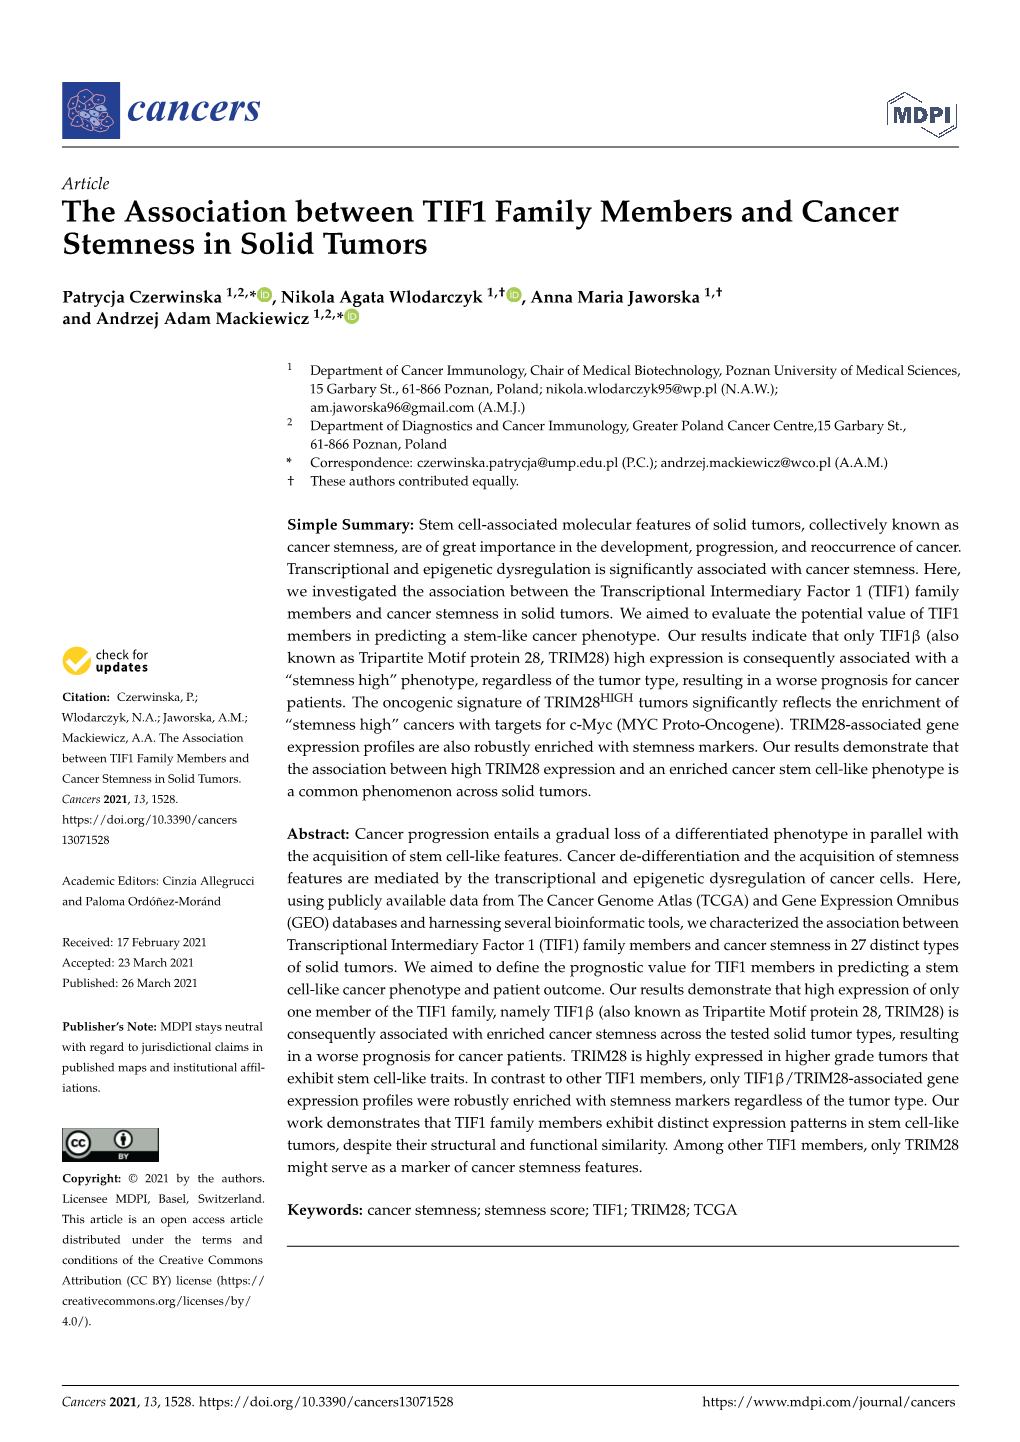 The Association Between TIF1 Family Members and Cancer Stemness in Solid Tumors